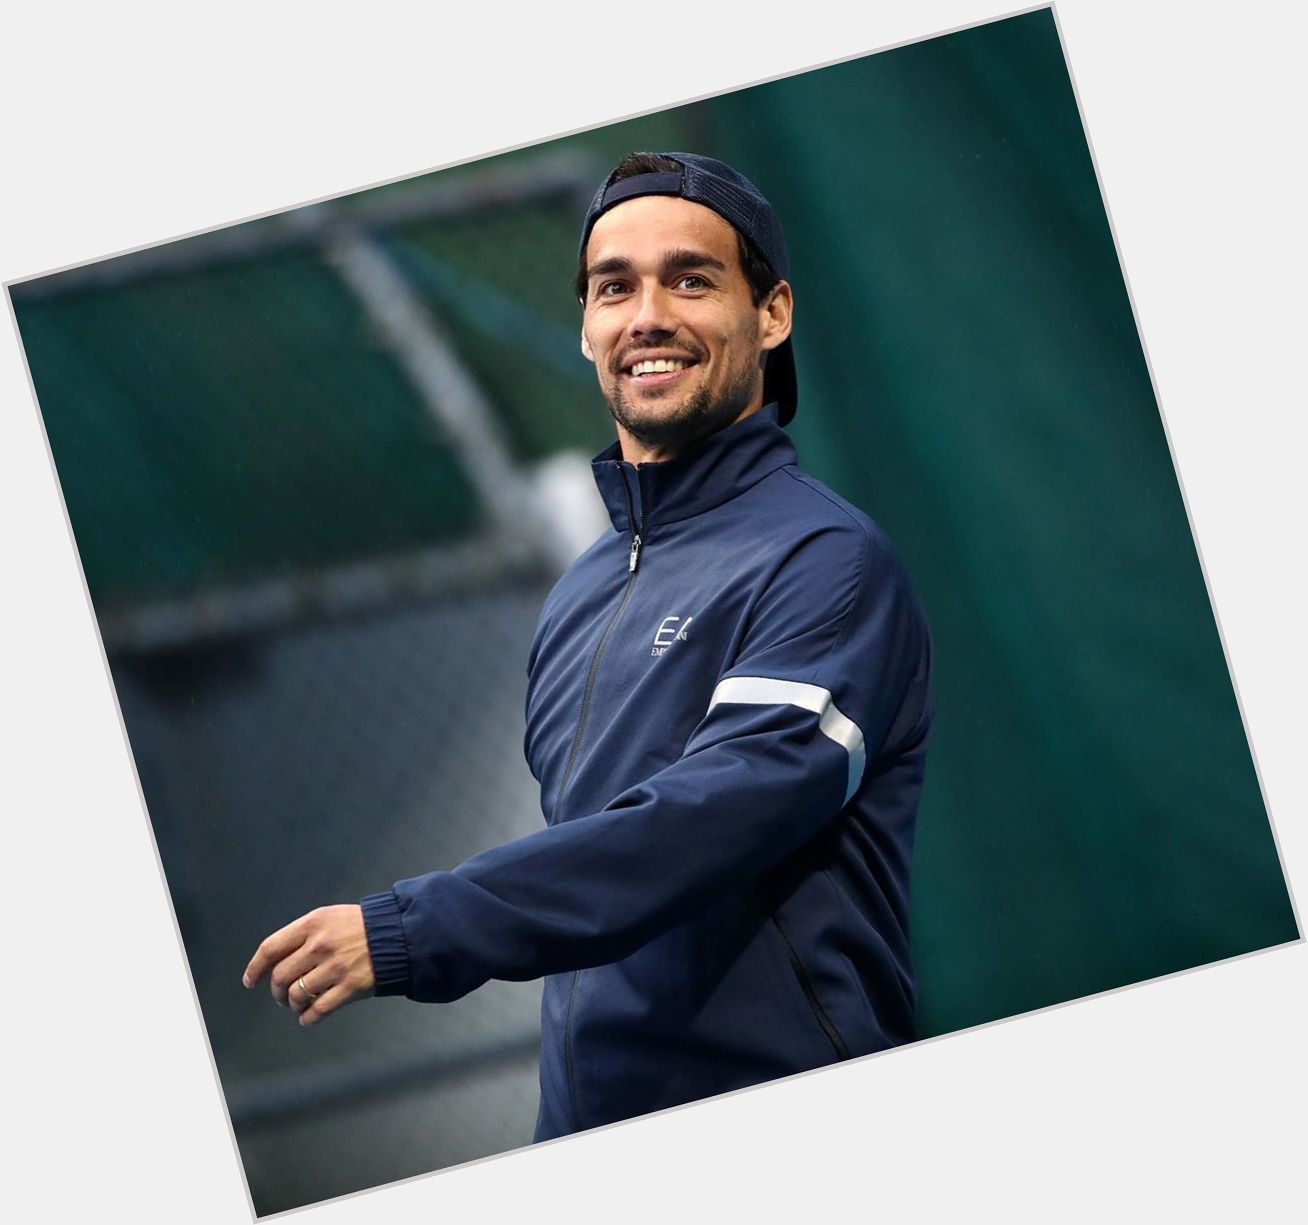 Happy Birthday Fabio Fognini!

One of the most talented and craziest player on tour!! 